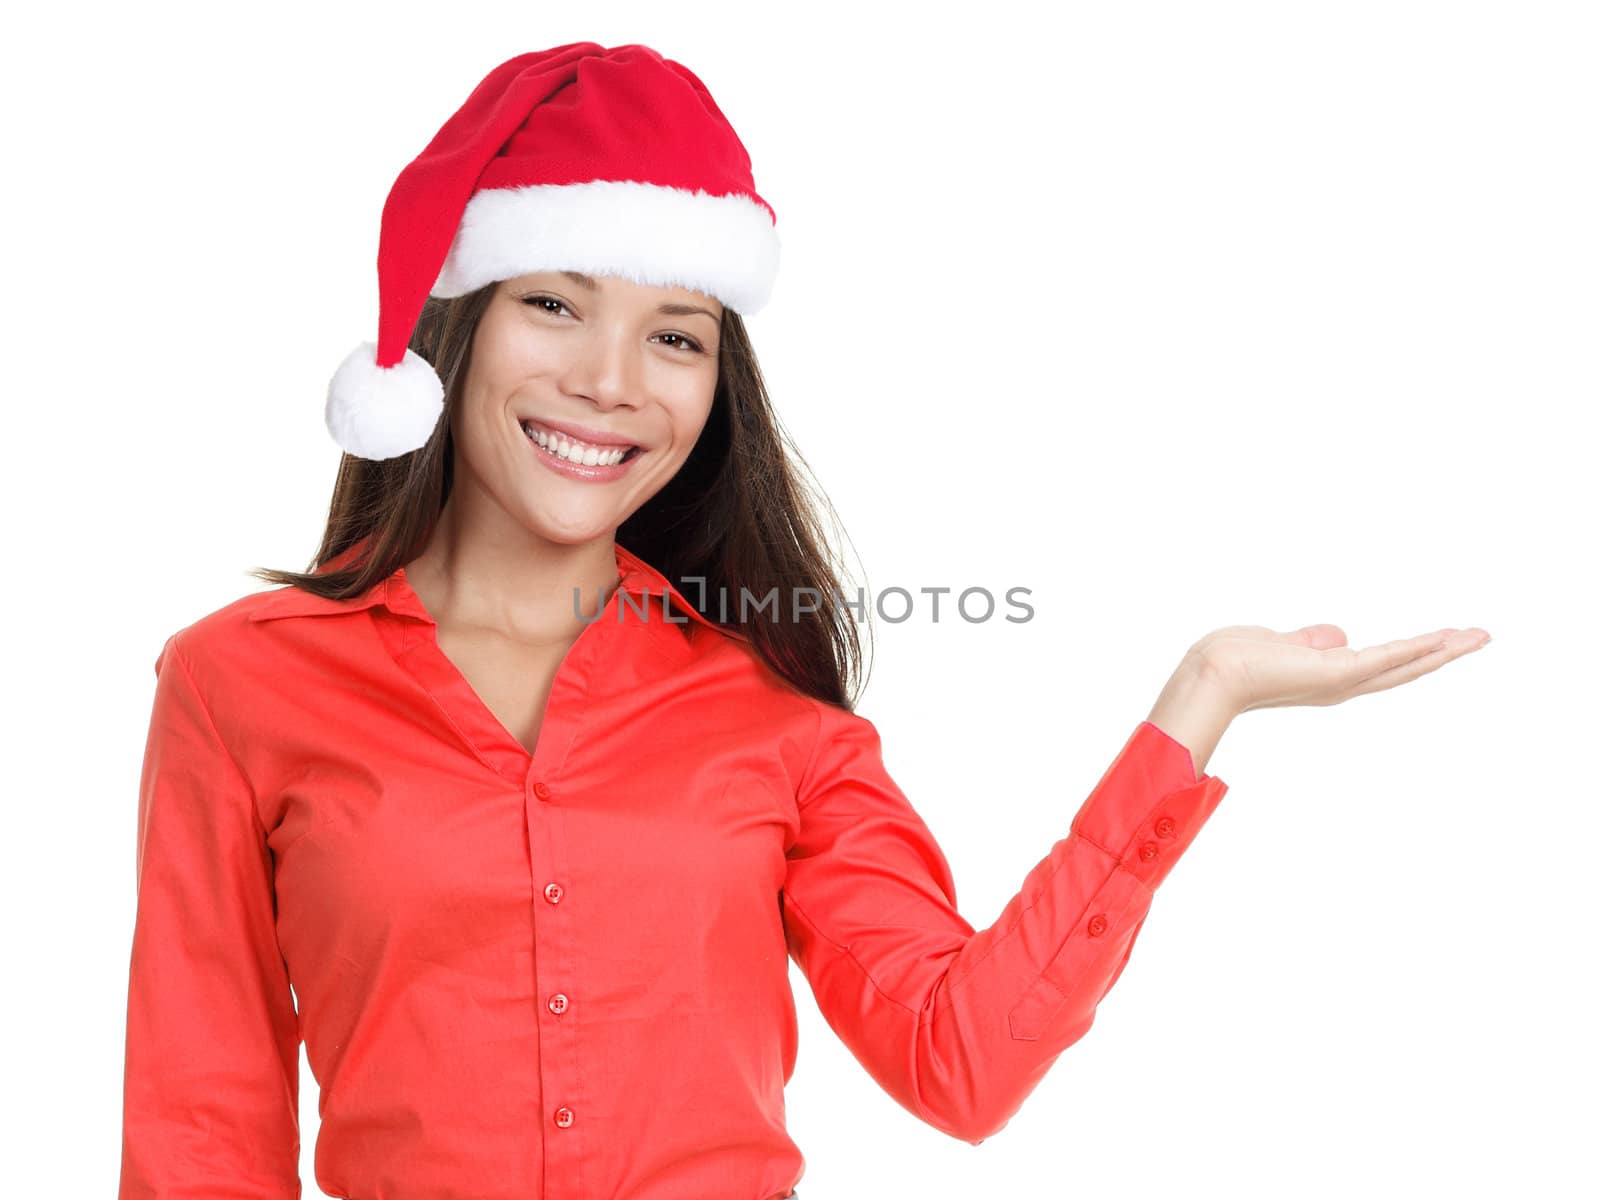 Smiling woman in christmas hat / santa hat showing open hand palm. Isolated on white background.